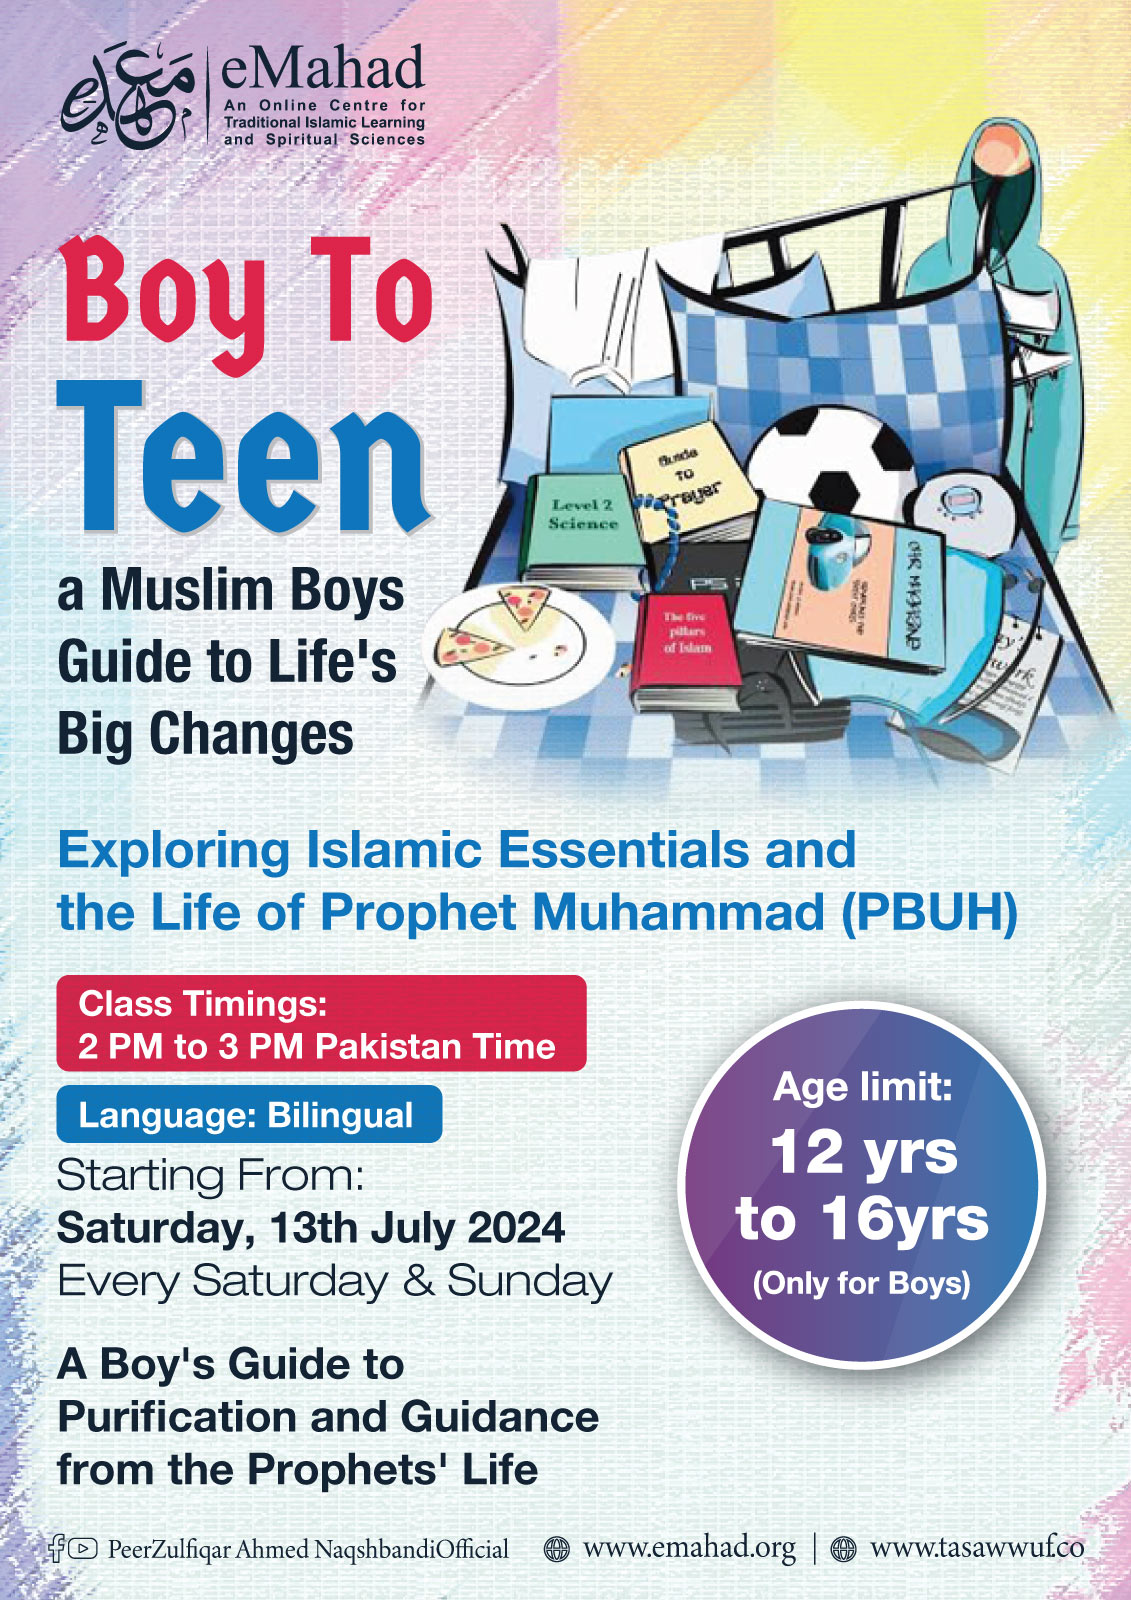 BOY TO TEEN -  A Muslim Boys Guide to Life's Big Changes | Only for Boys (12yrs - 16Yrs) | In Bilingual Language